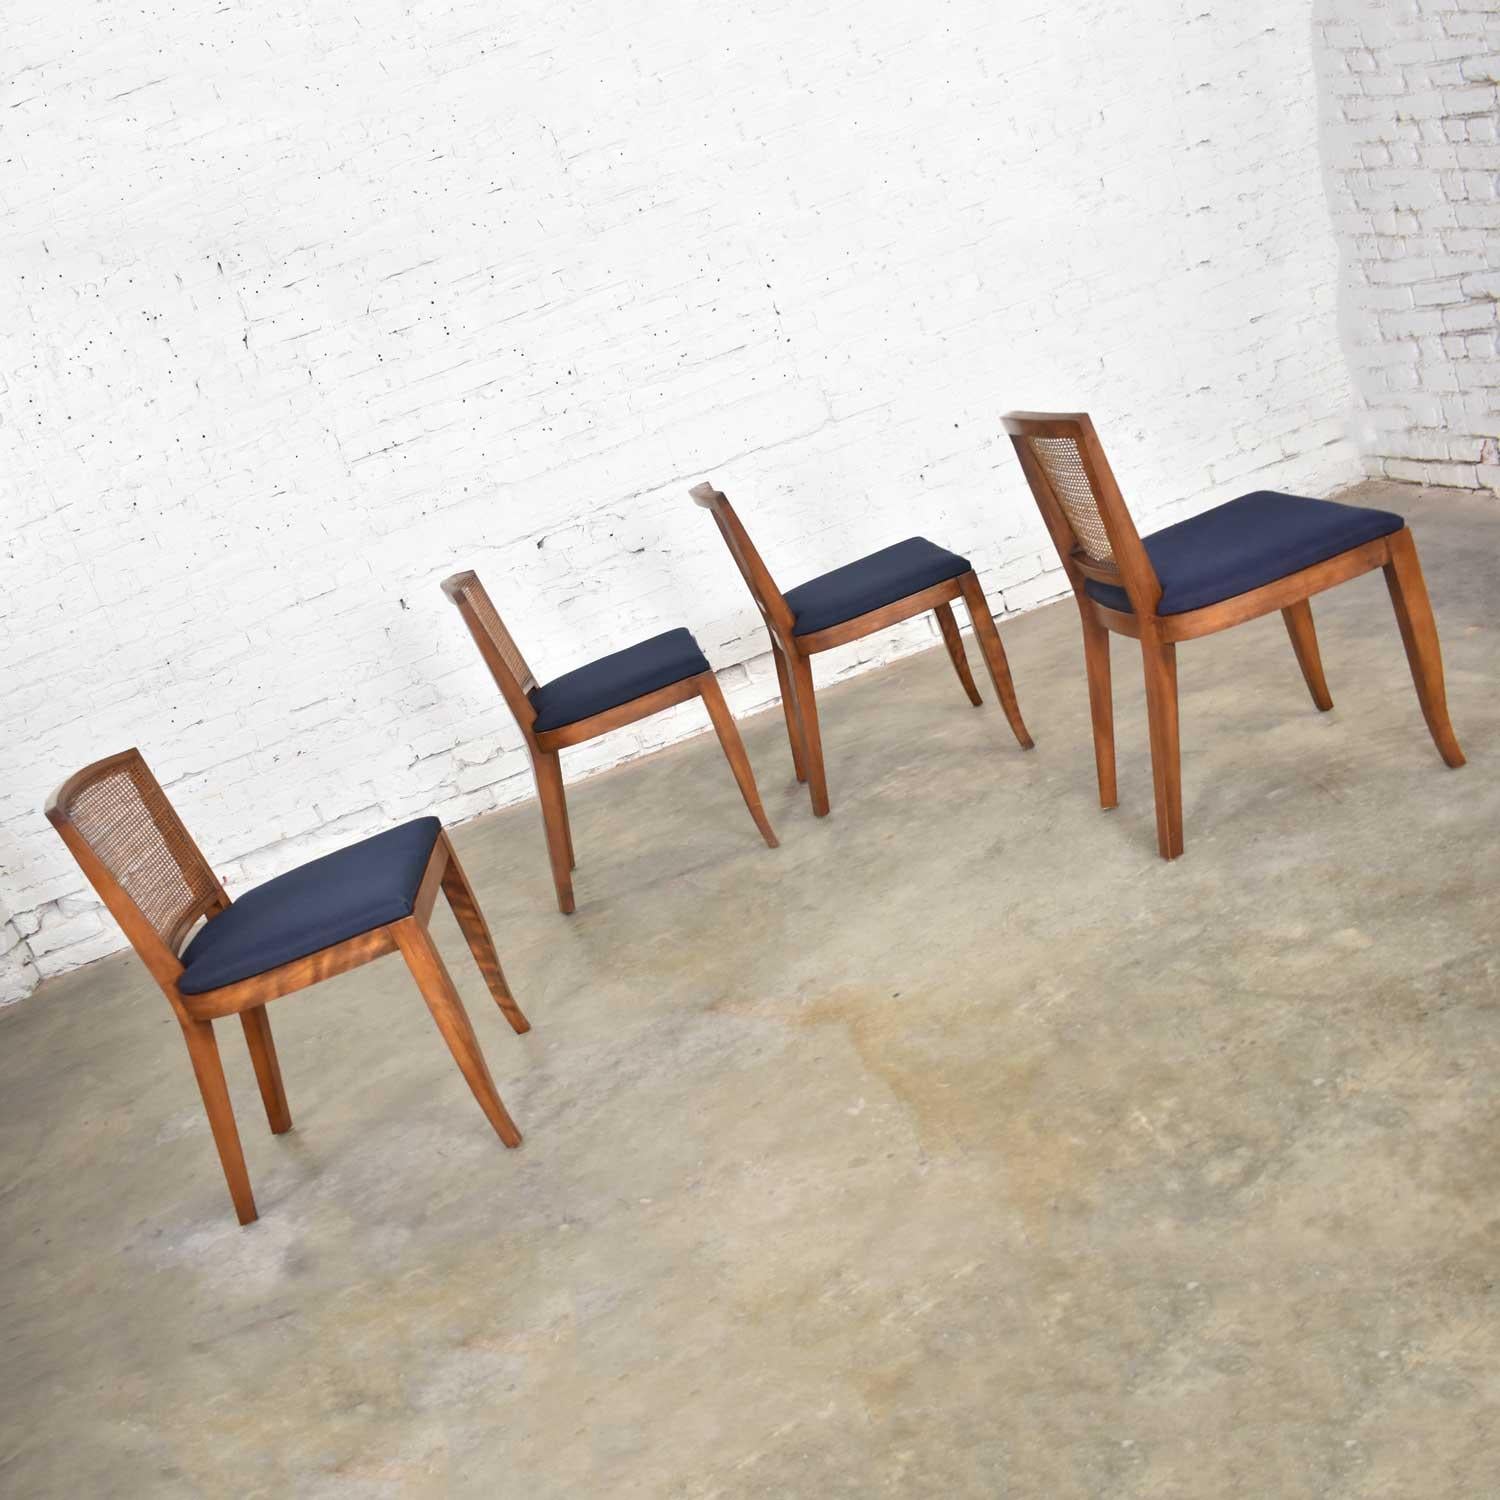 Unknown Vintage Mid-Century Modern Set of 4 Cane Back Dining Chairs Newly Upholstered